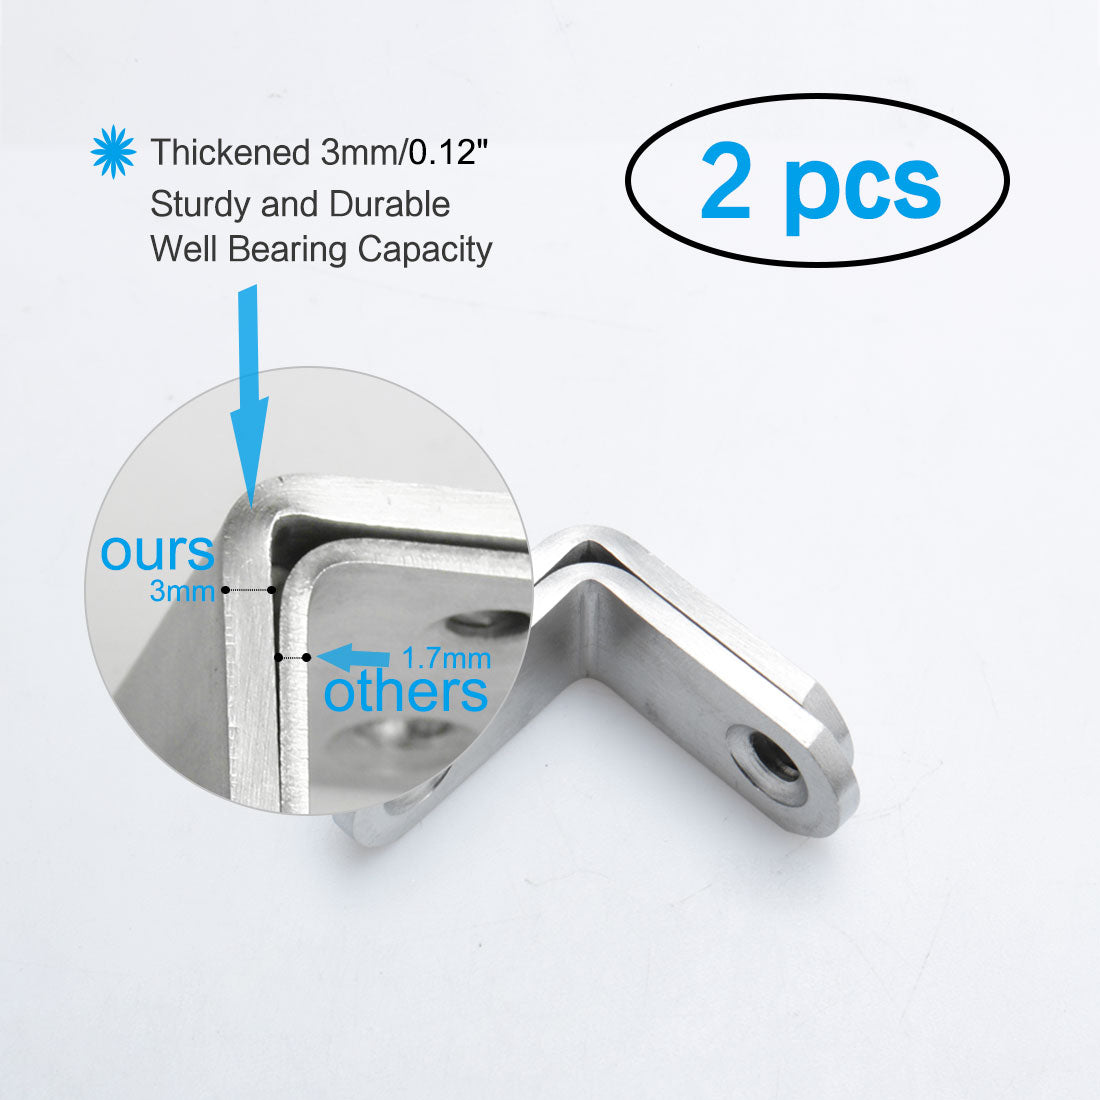 uxcell Uxcell Angle Bracket Stainless Steel Brace Fastener Support w Screws 30 x 30mm, 2pcs